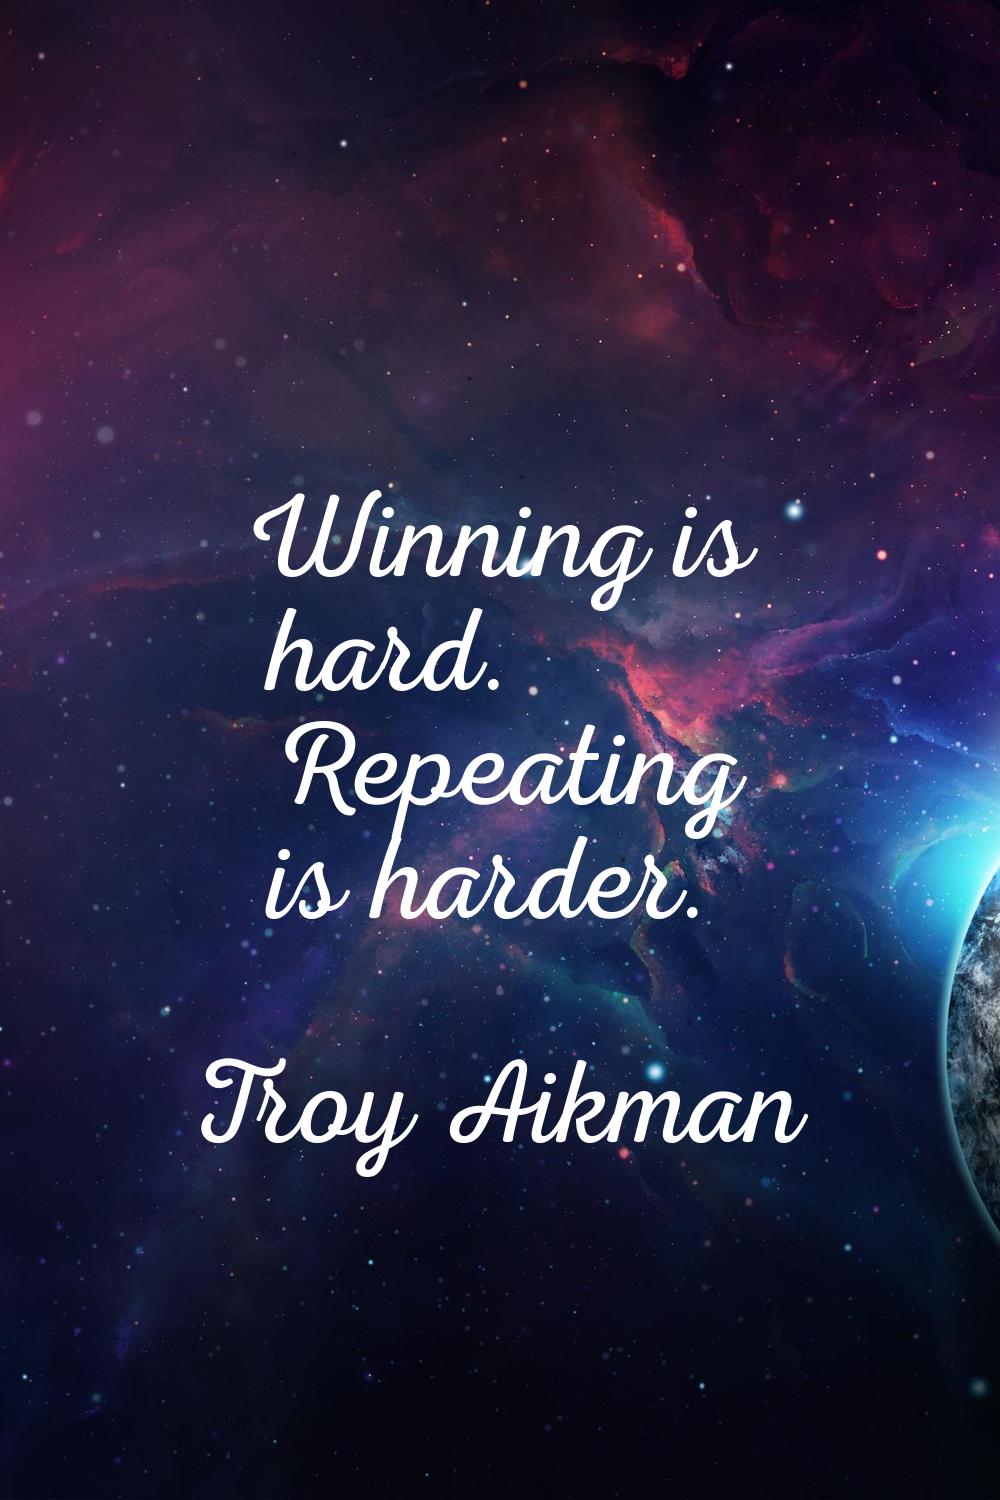 Winning is hard. Repeating is harder.